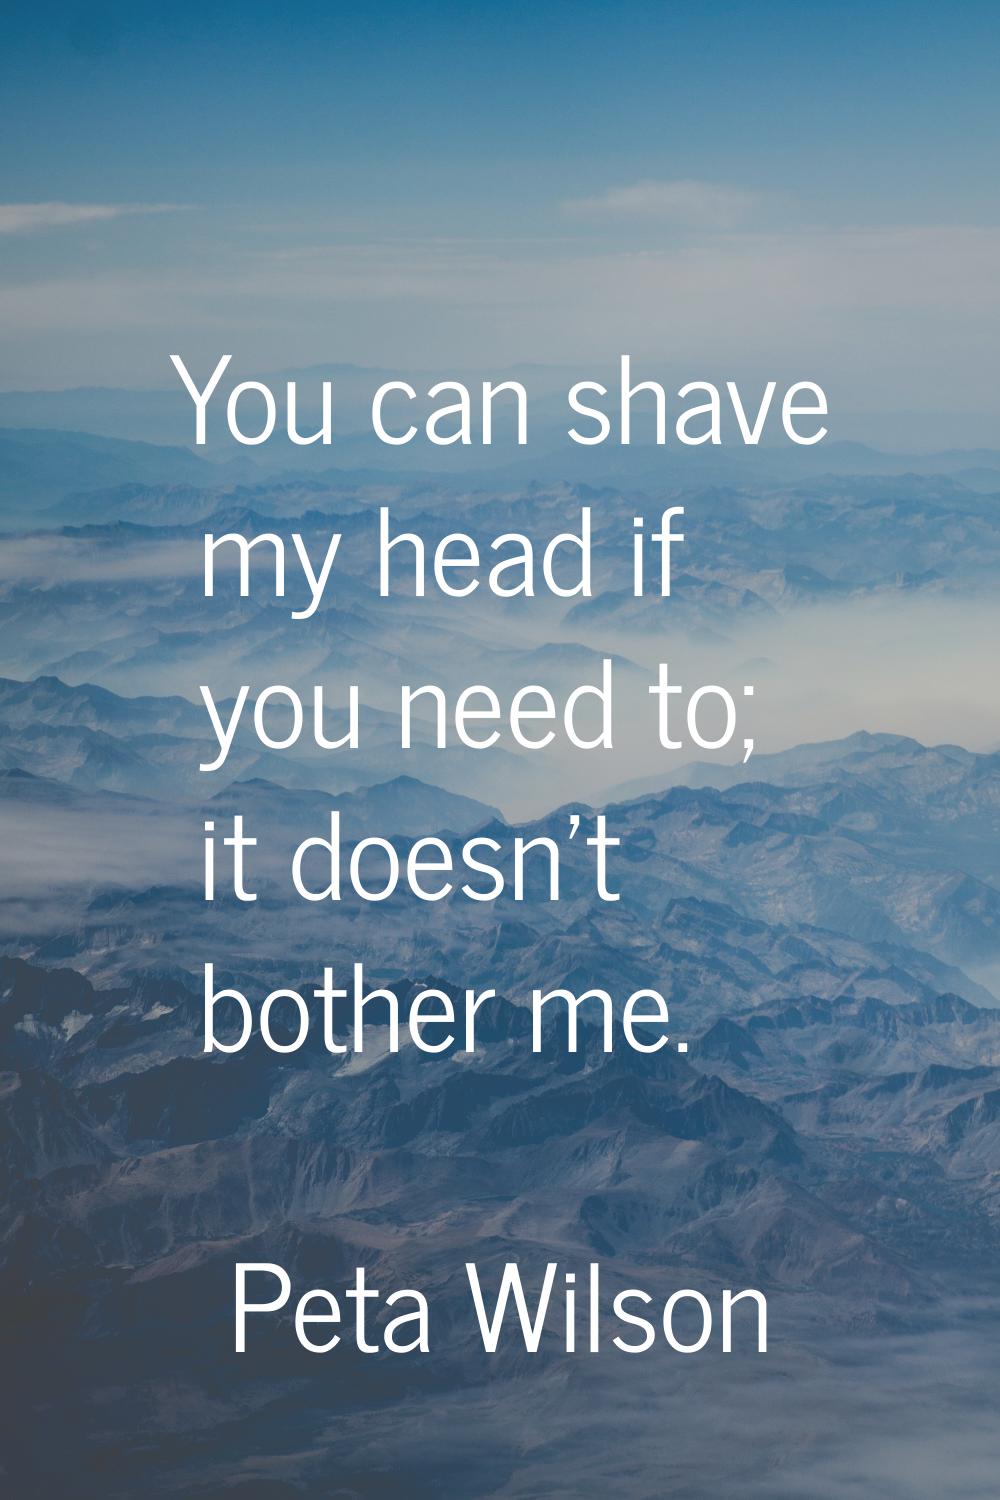 You can shave my head if you need to; it doesn't bother me.